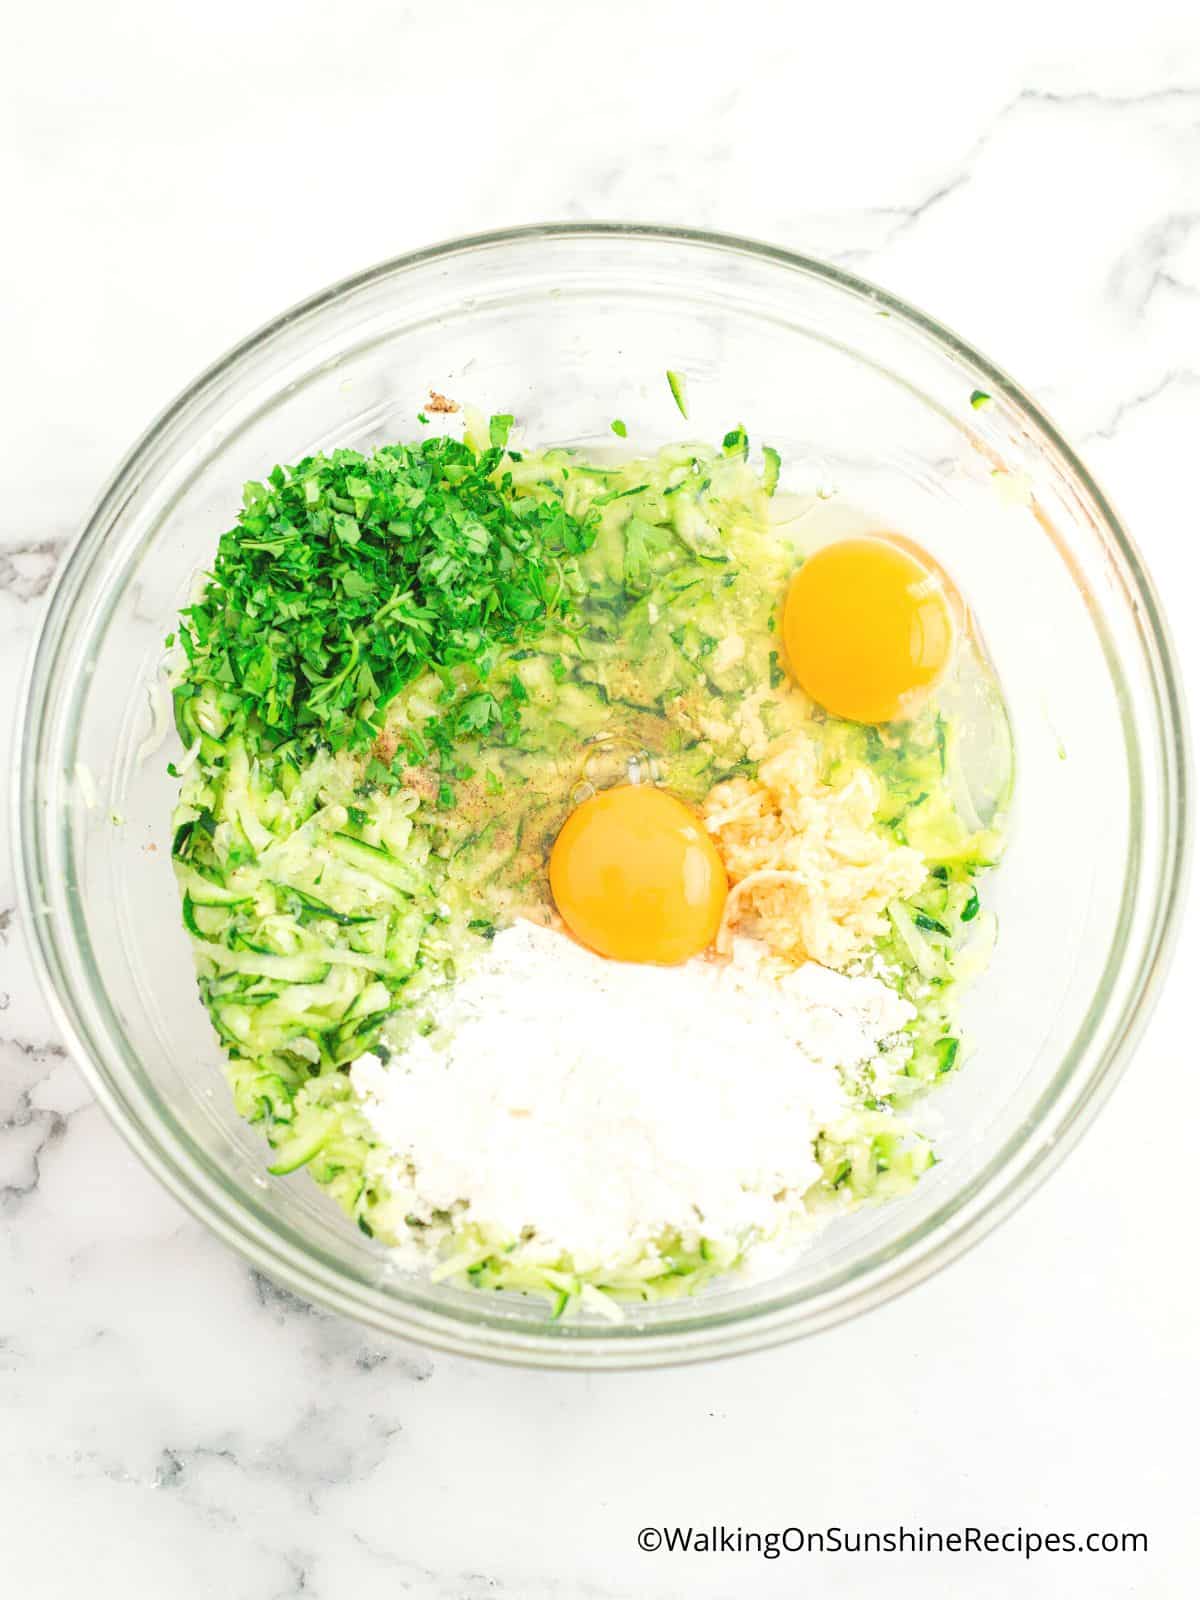 Grated zucchini, flour, eggs and parsley in mixing bowl.